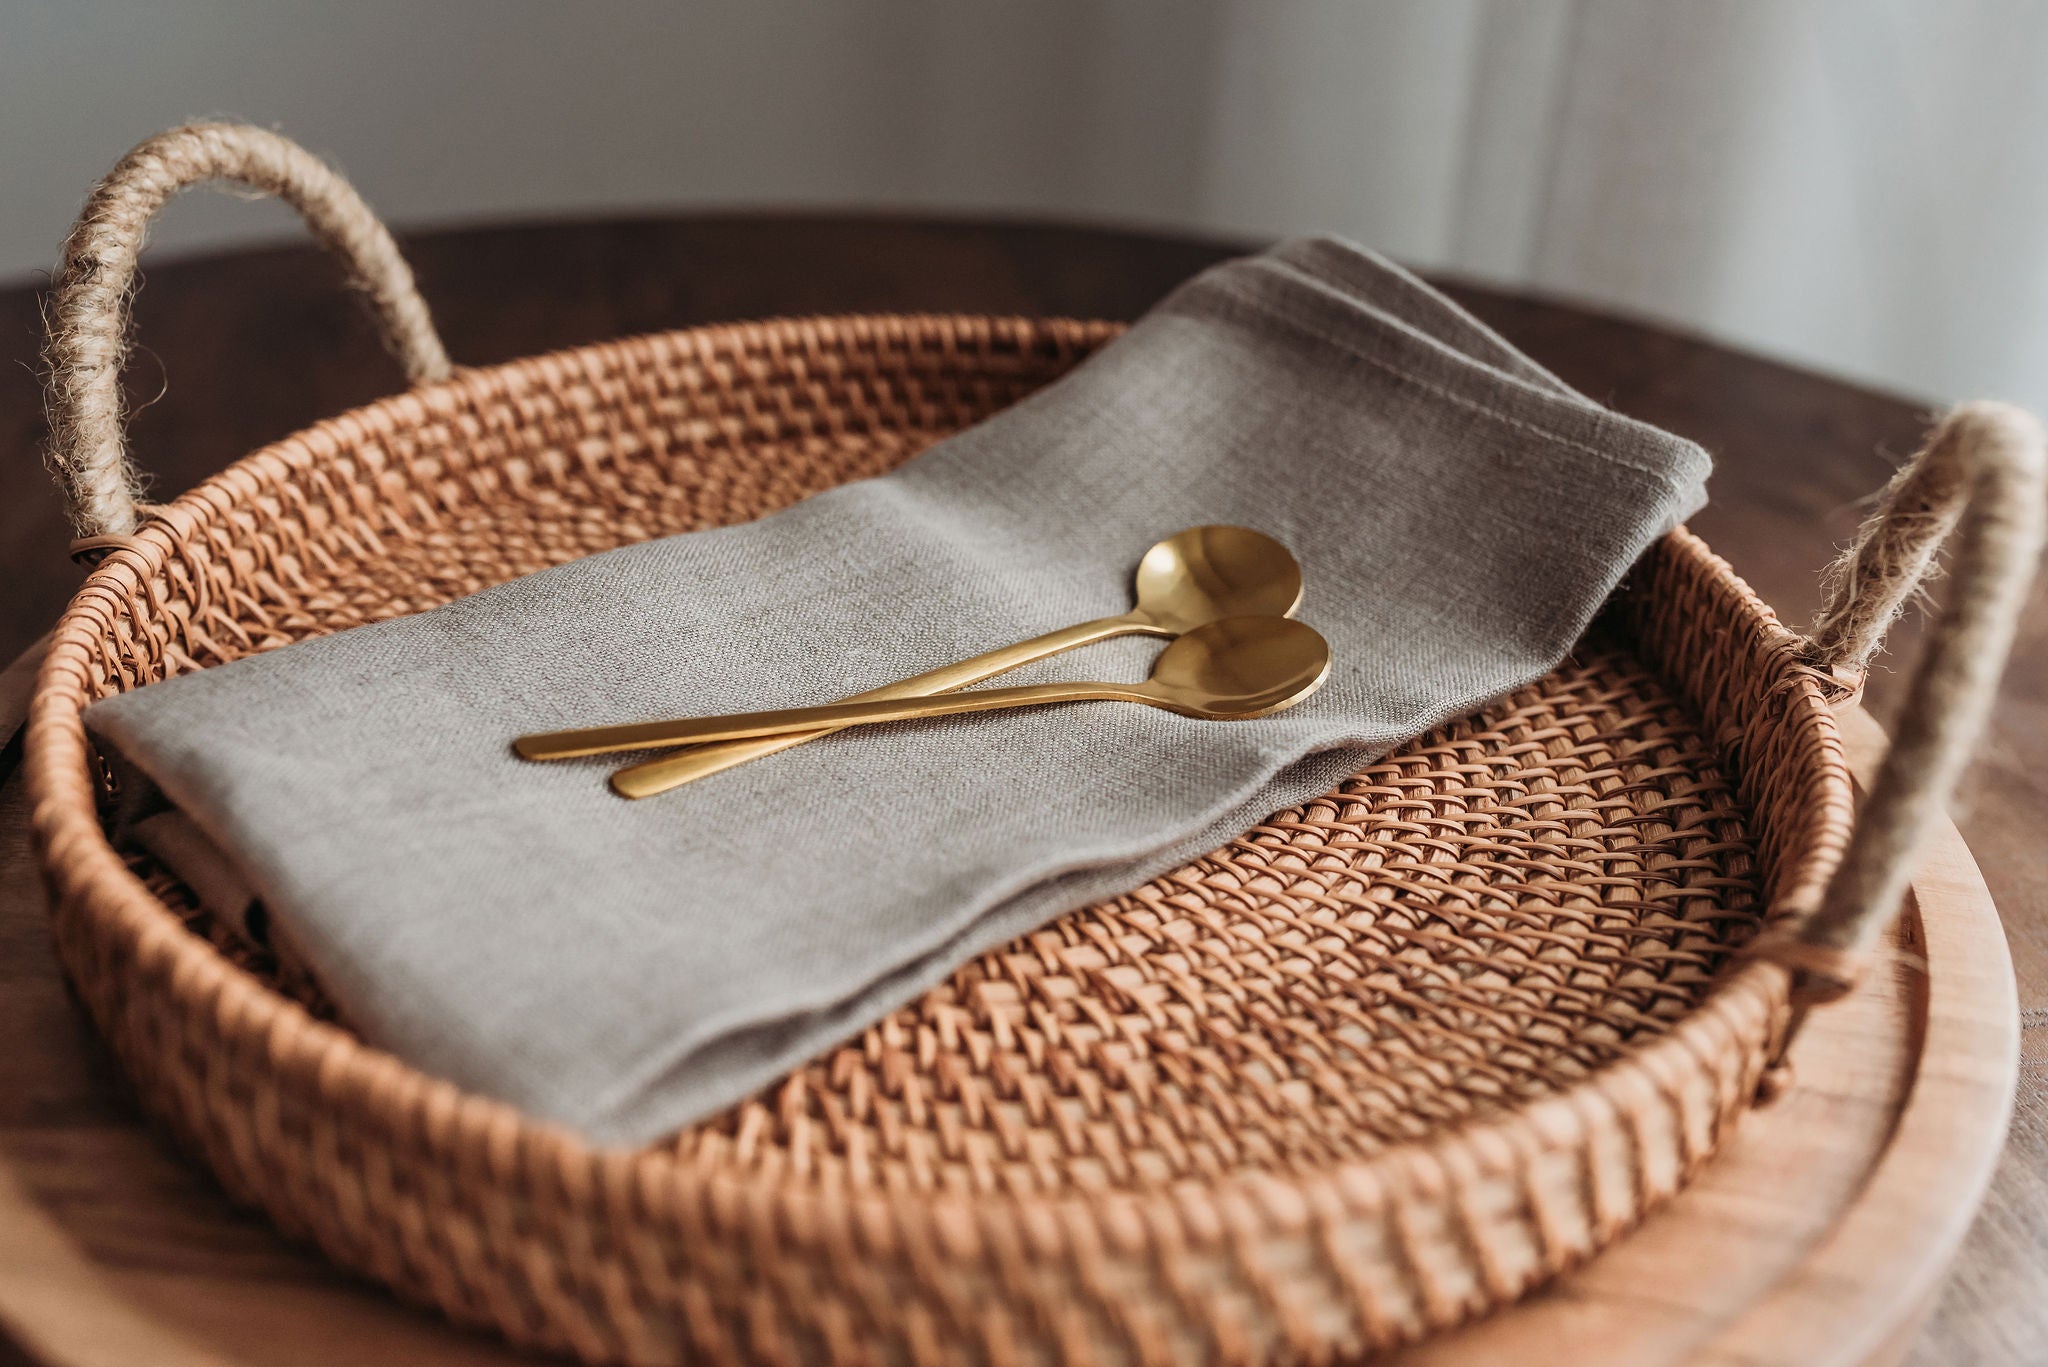 Woven rattan tray with linen and spoons